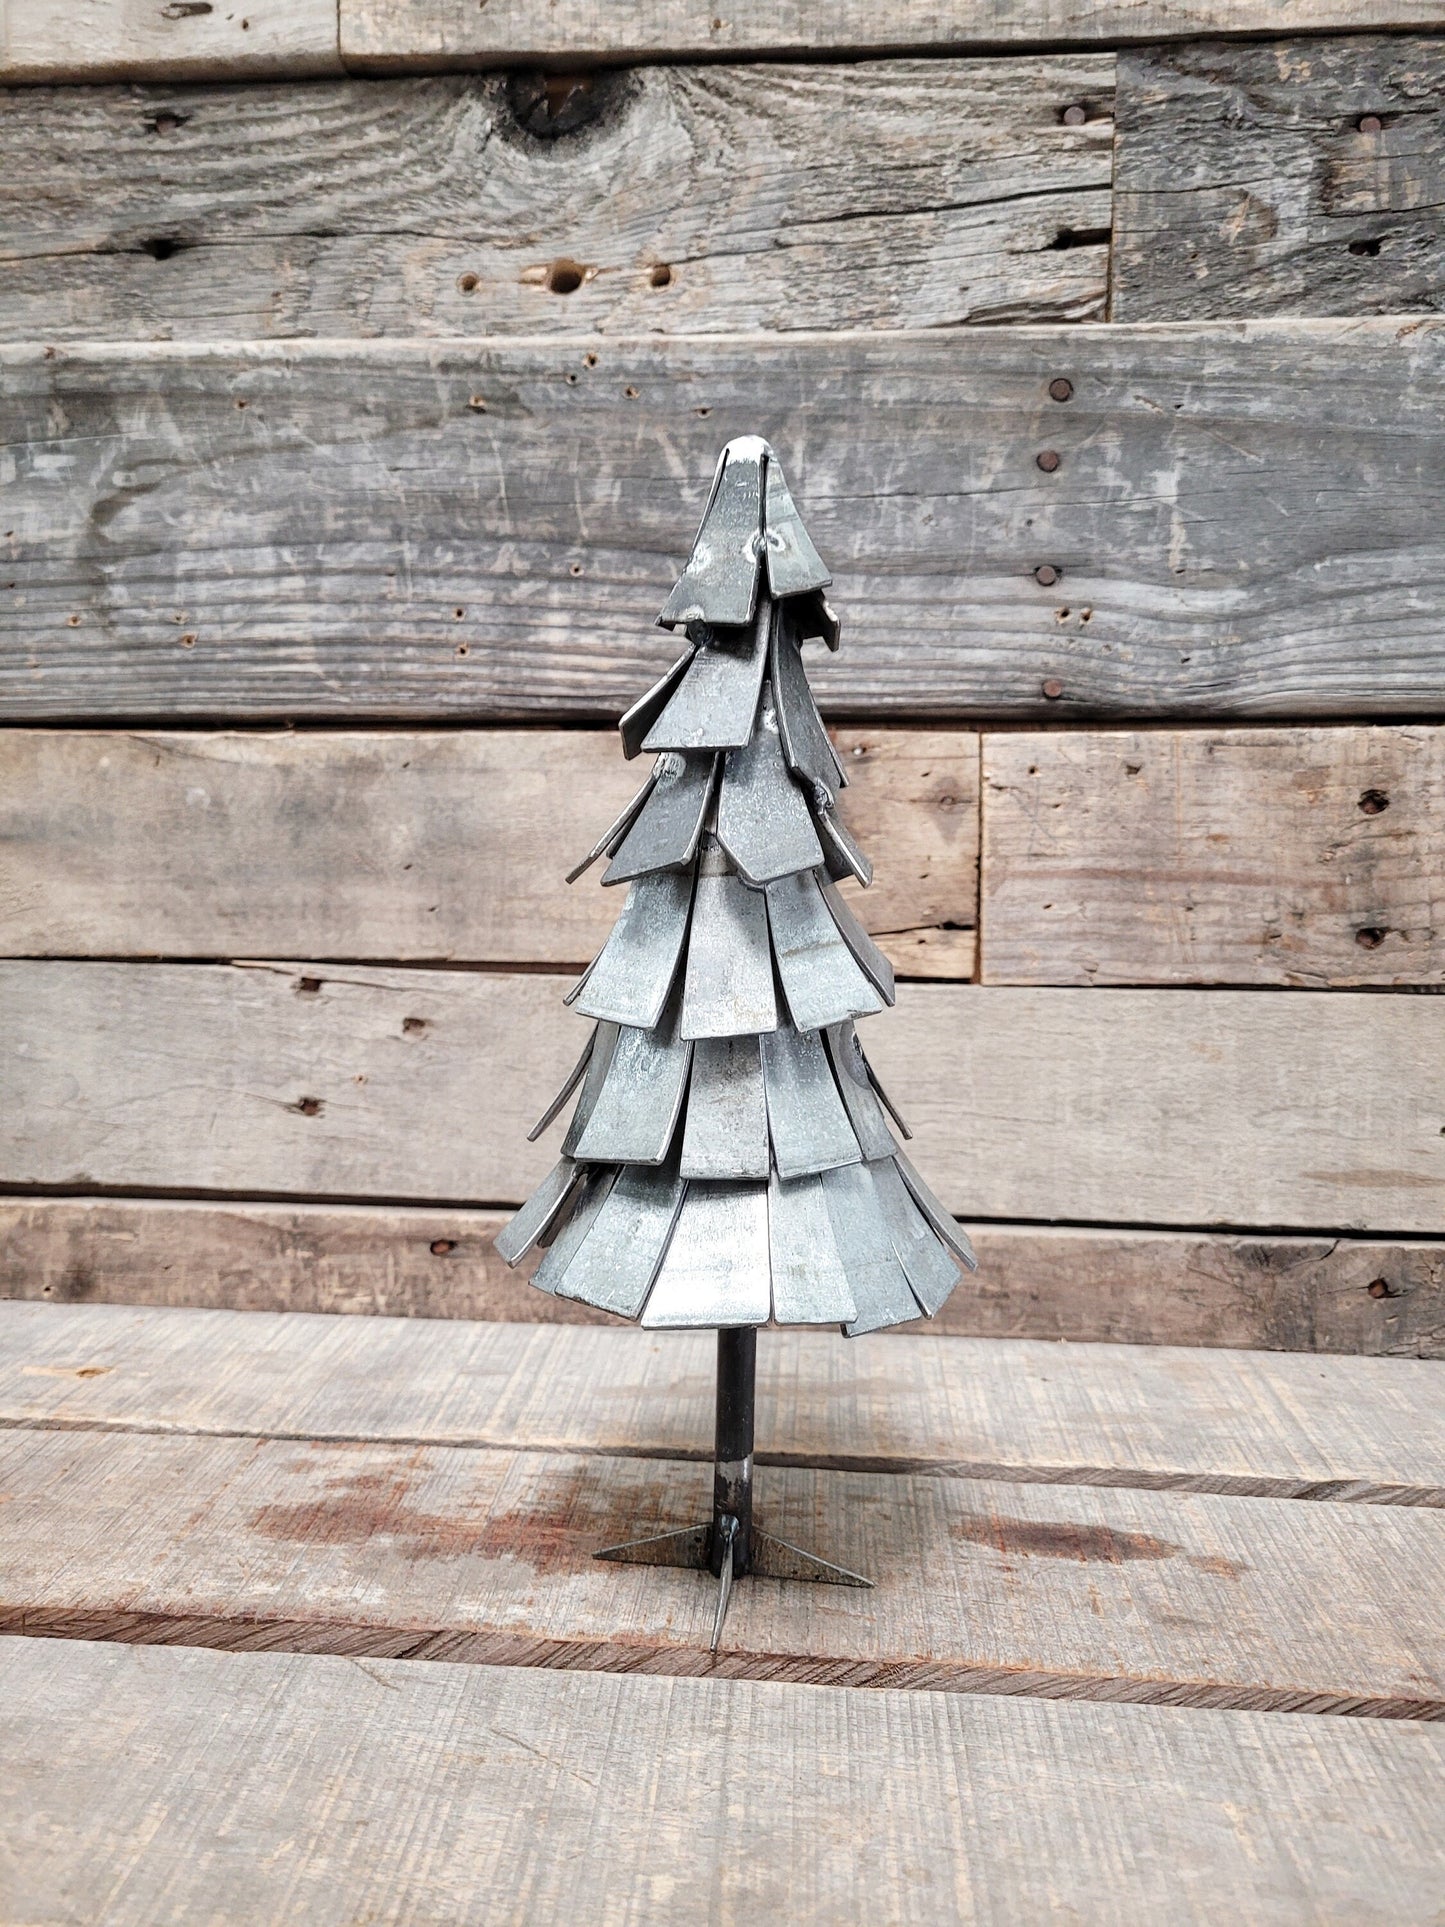 Tree Made From Retired Napa Wine Barrel Rings - Kayu - Limited Edition + Signed + Numbered - 100% Recycled!